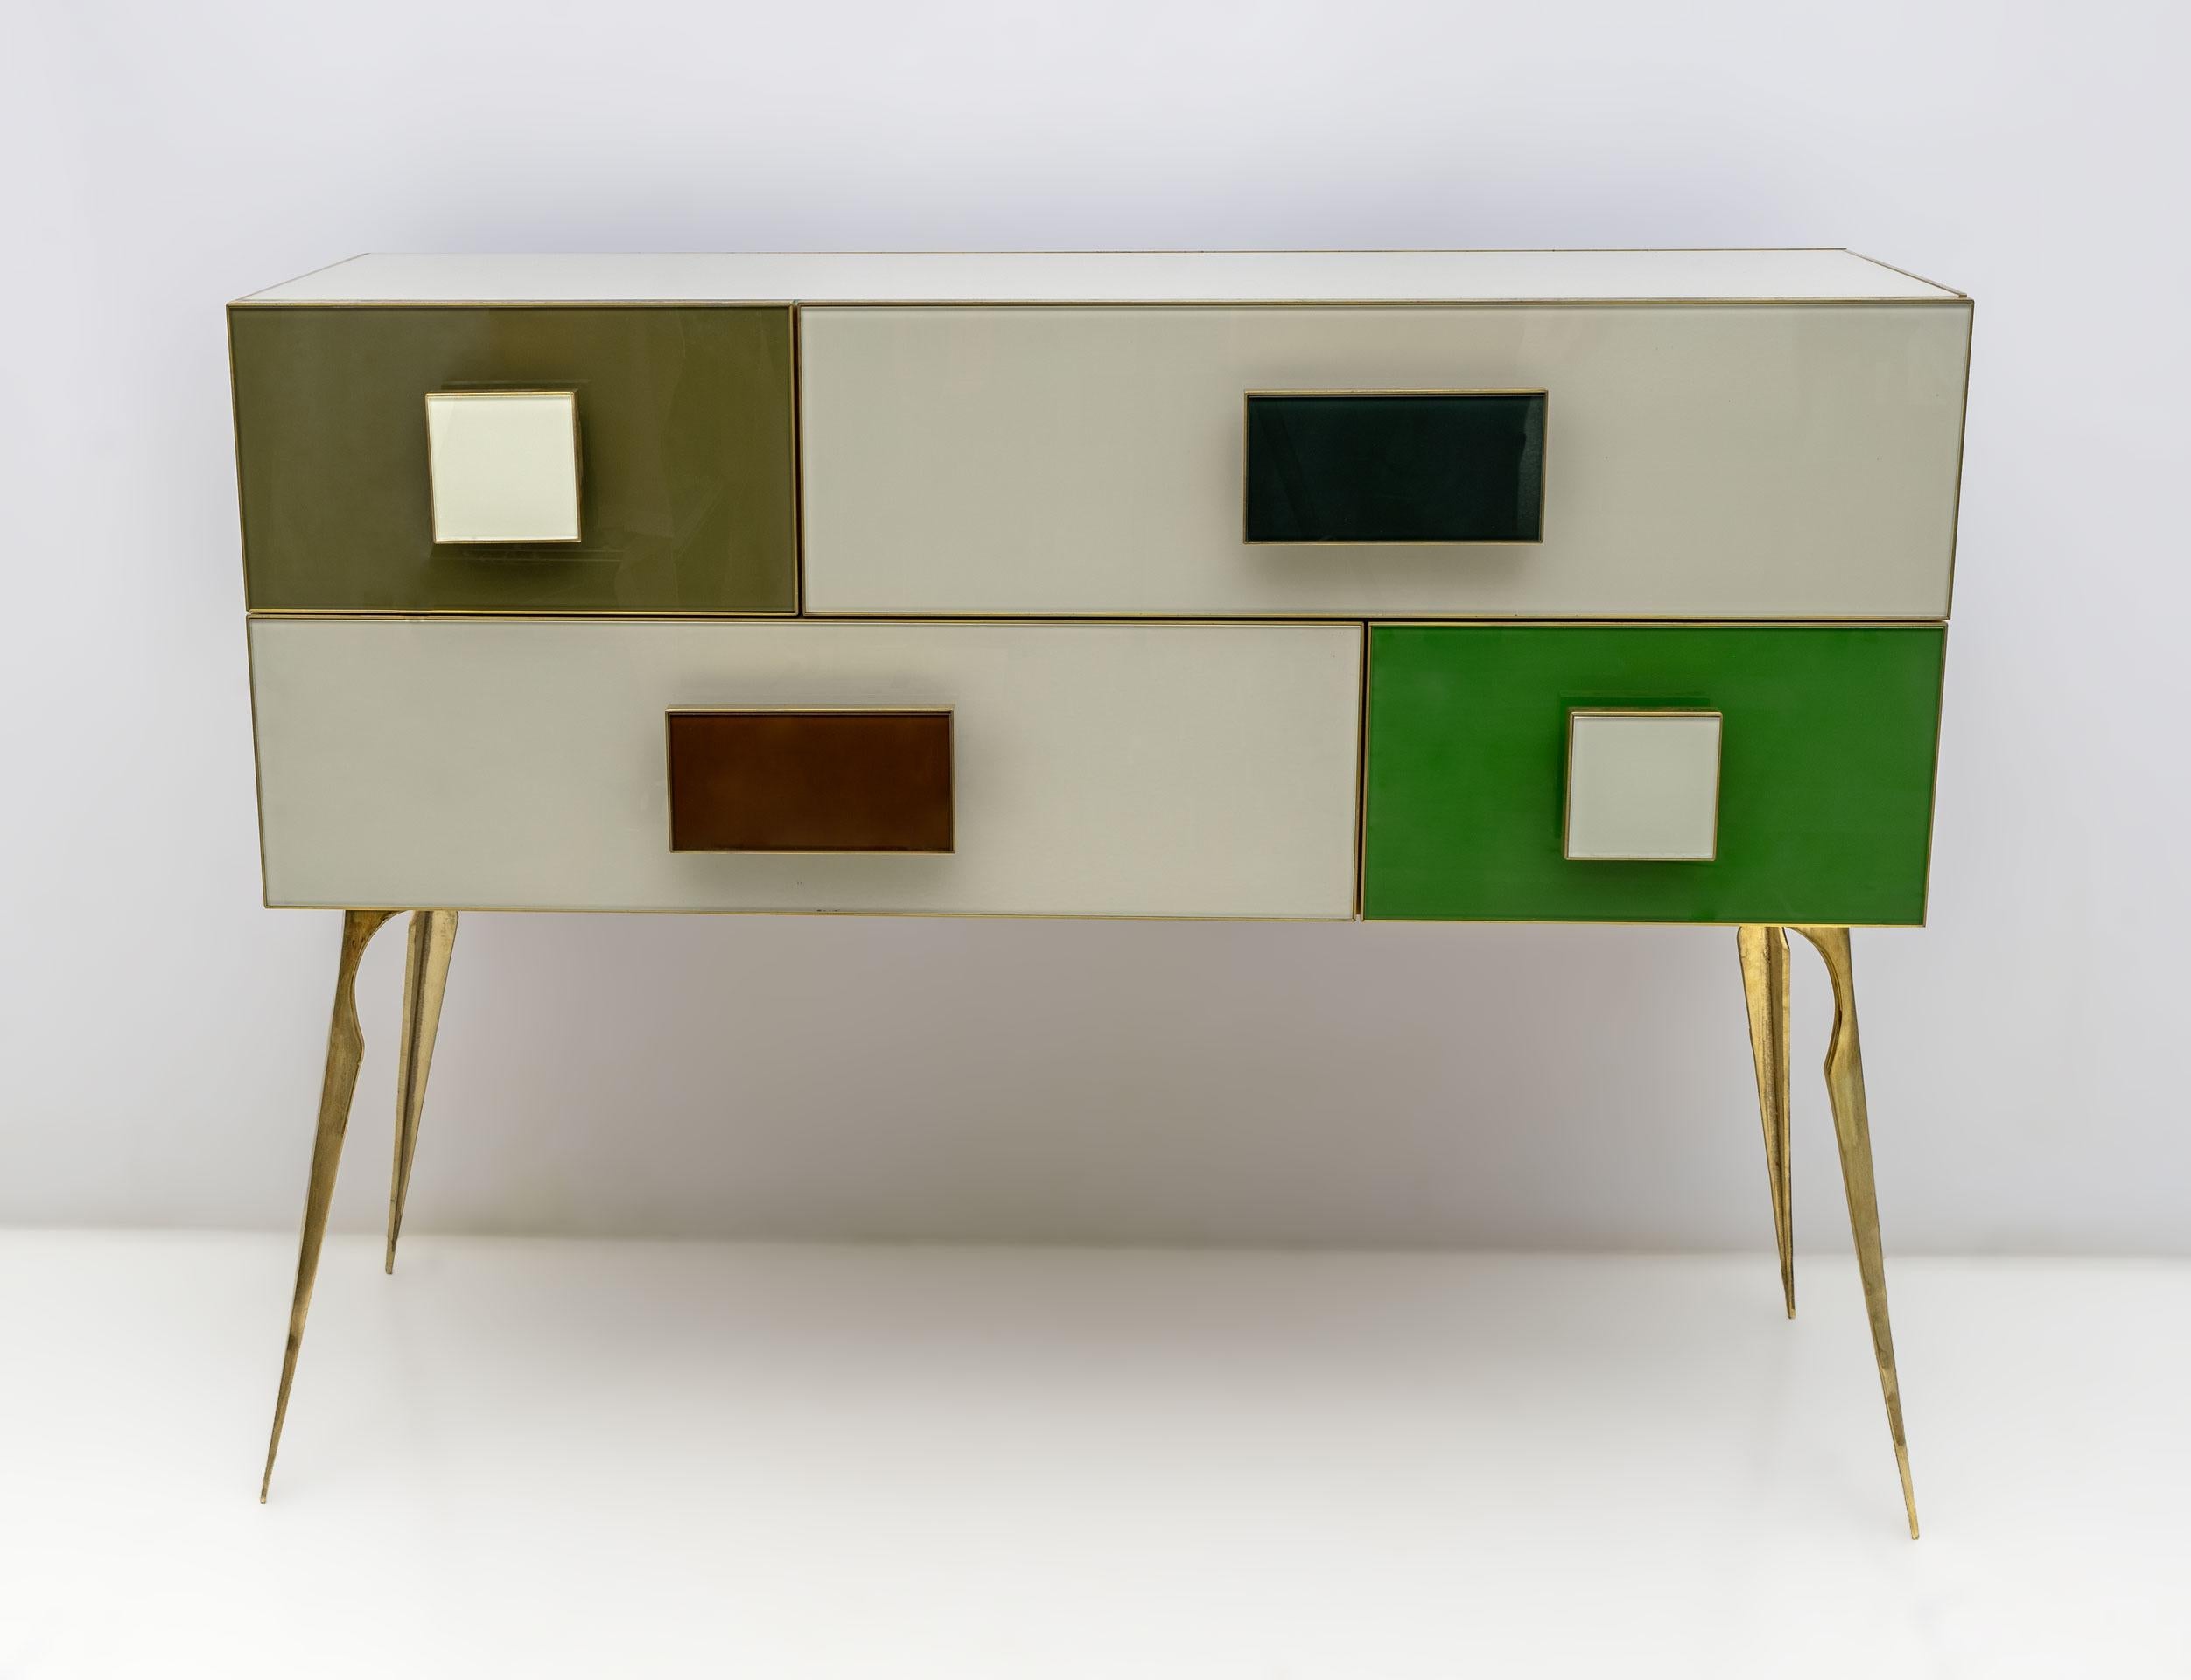 An interesting colorful postmodern piece with a Pop Art twist, very fun Italian chest of drawers or dresser, 4 drawer front design in ivory and green, as well as rectangular Bordox glass handles and light green and dark green, which highlight the